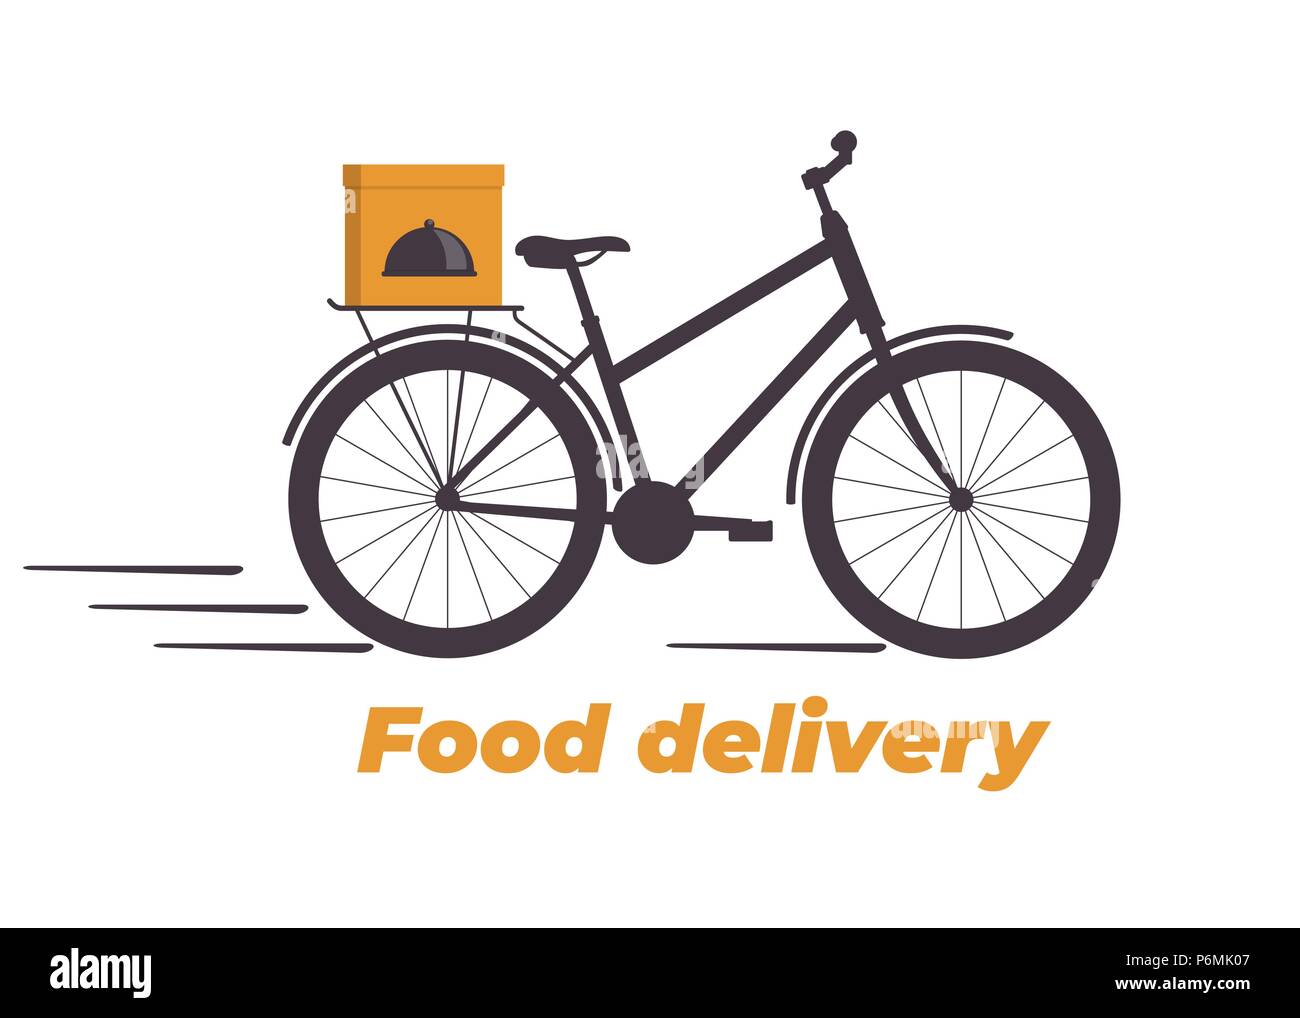 Food delivery design. Bicycle with box on the trunk. Food delivery service logo. Fast delivery. Flat vector illustration Stock Vector